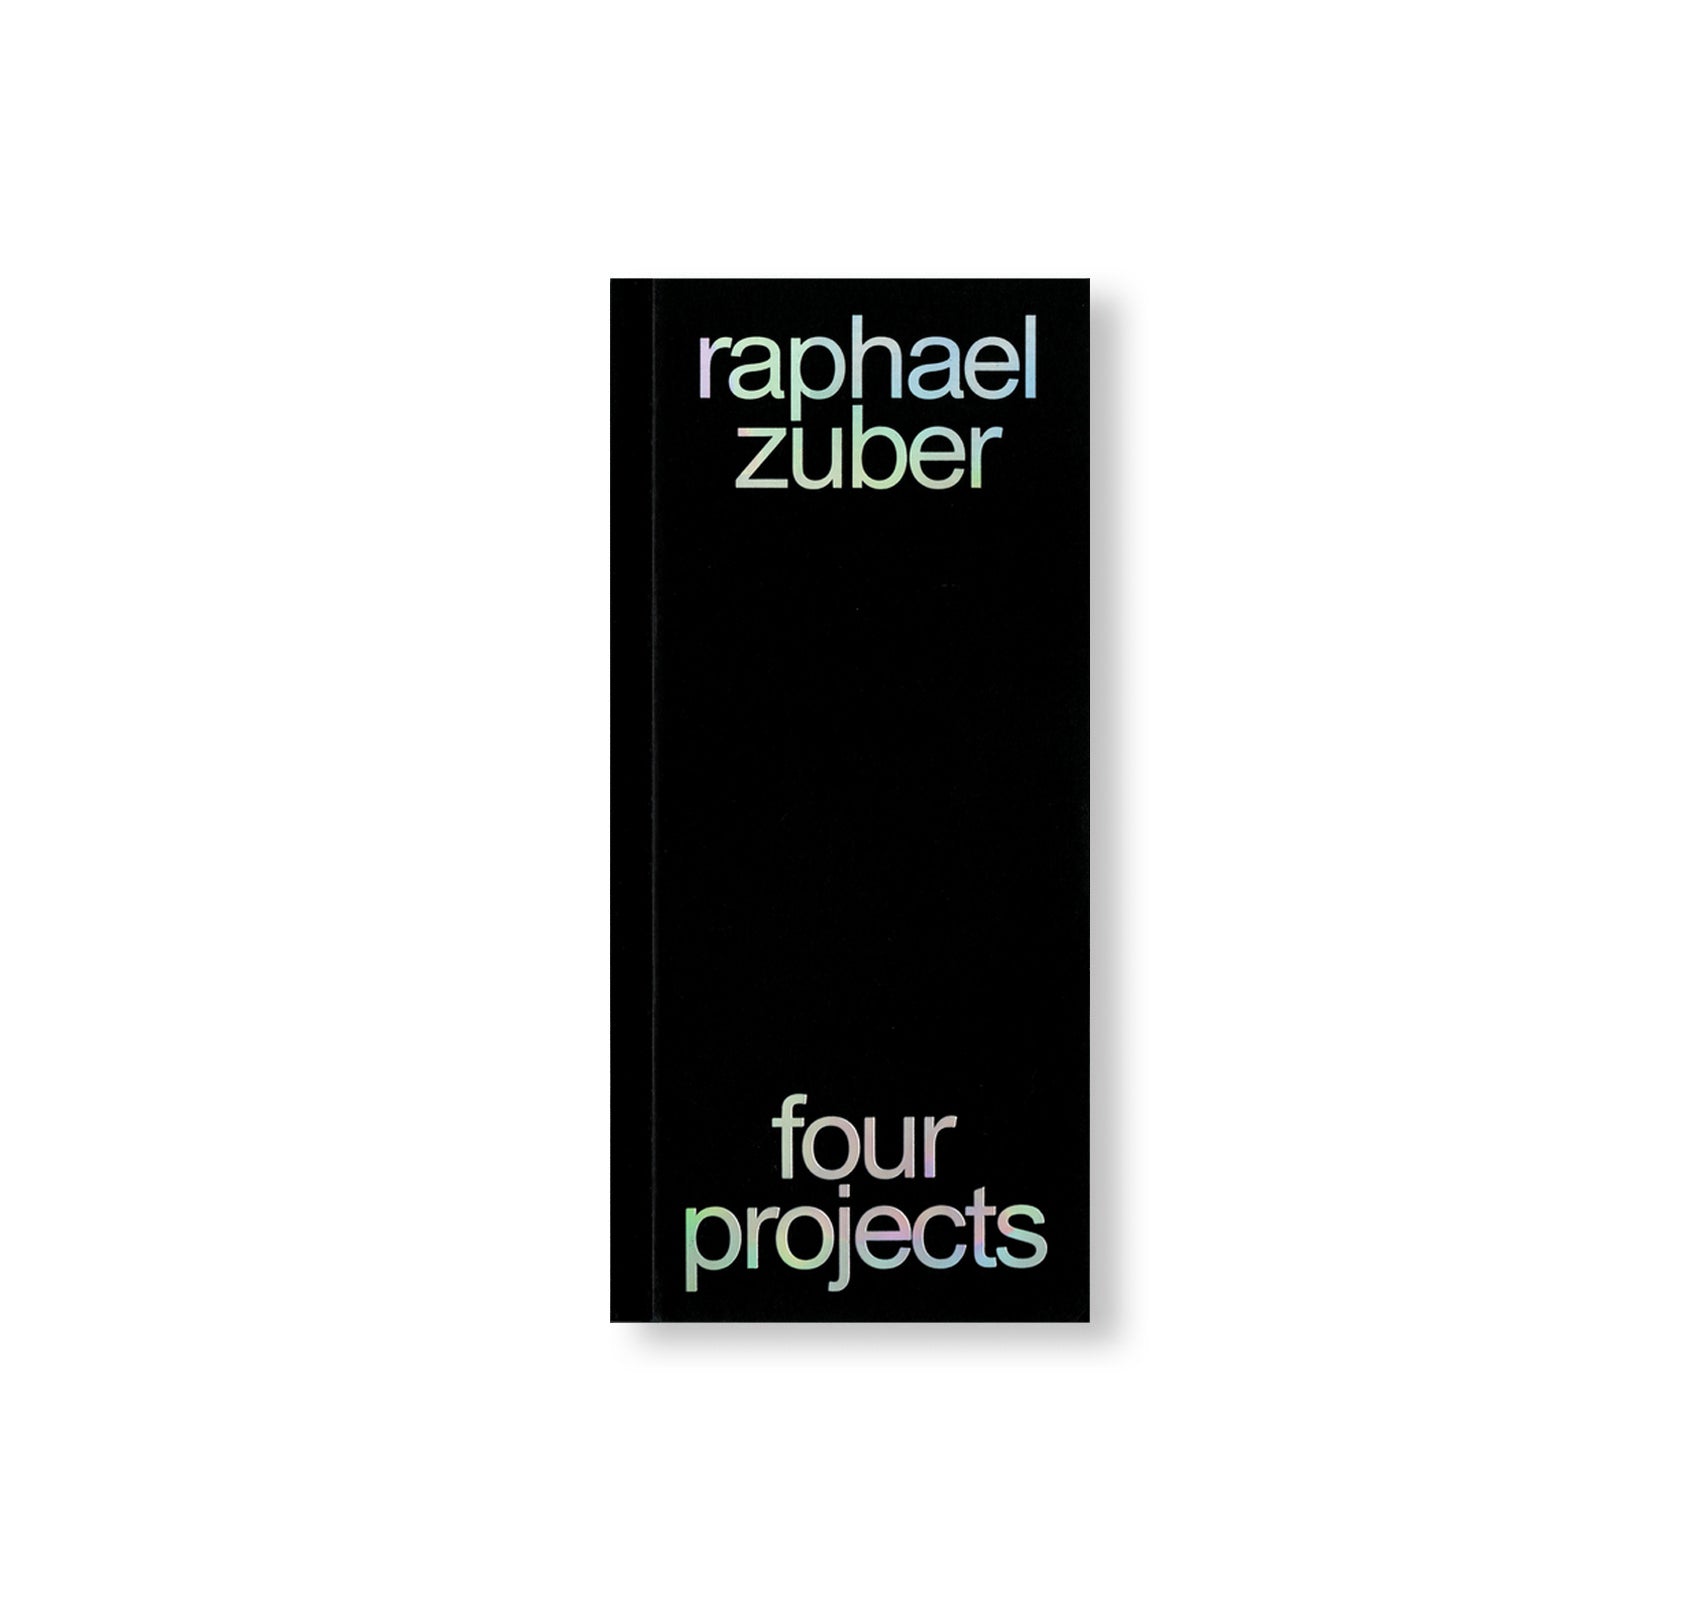 FOUR PROJECTS by Raphael Zuber